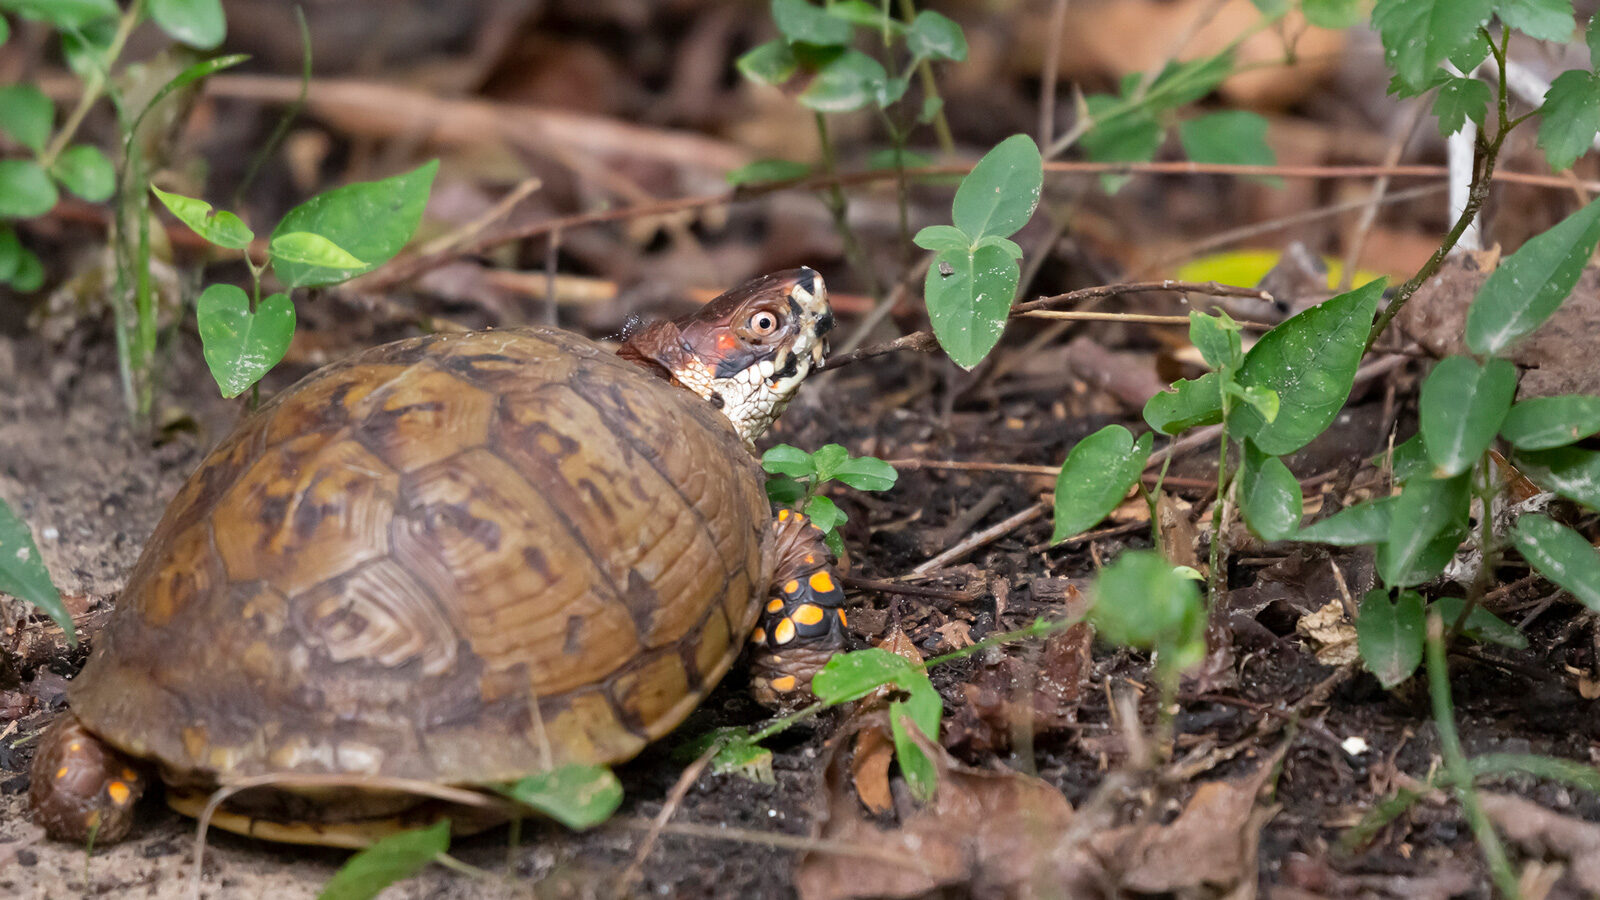 Eastern box turtle foraging on the ground